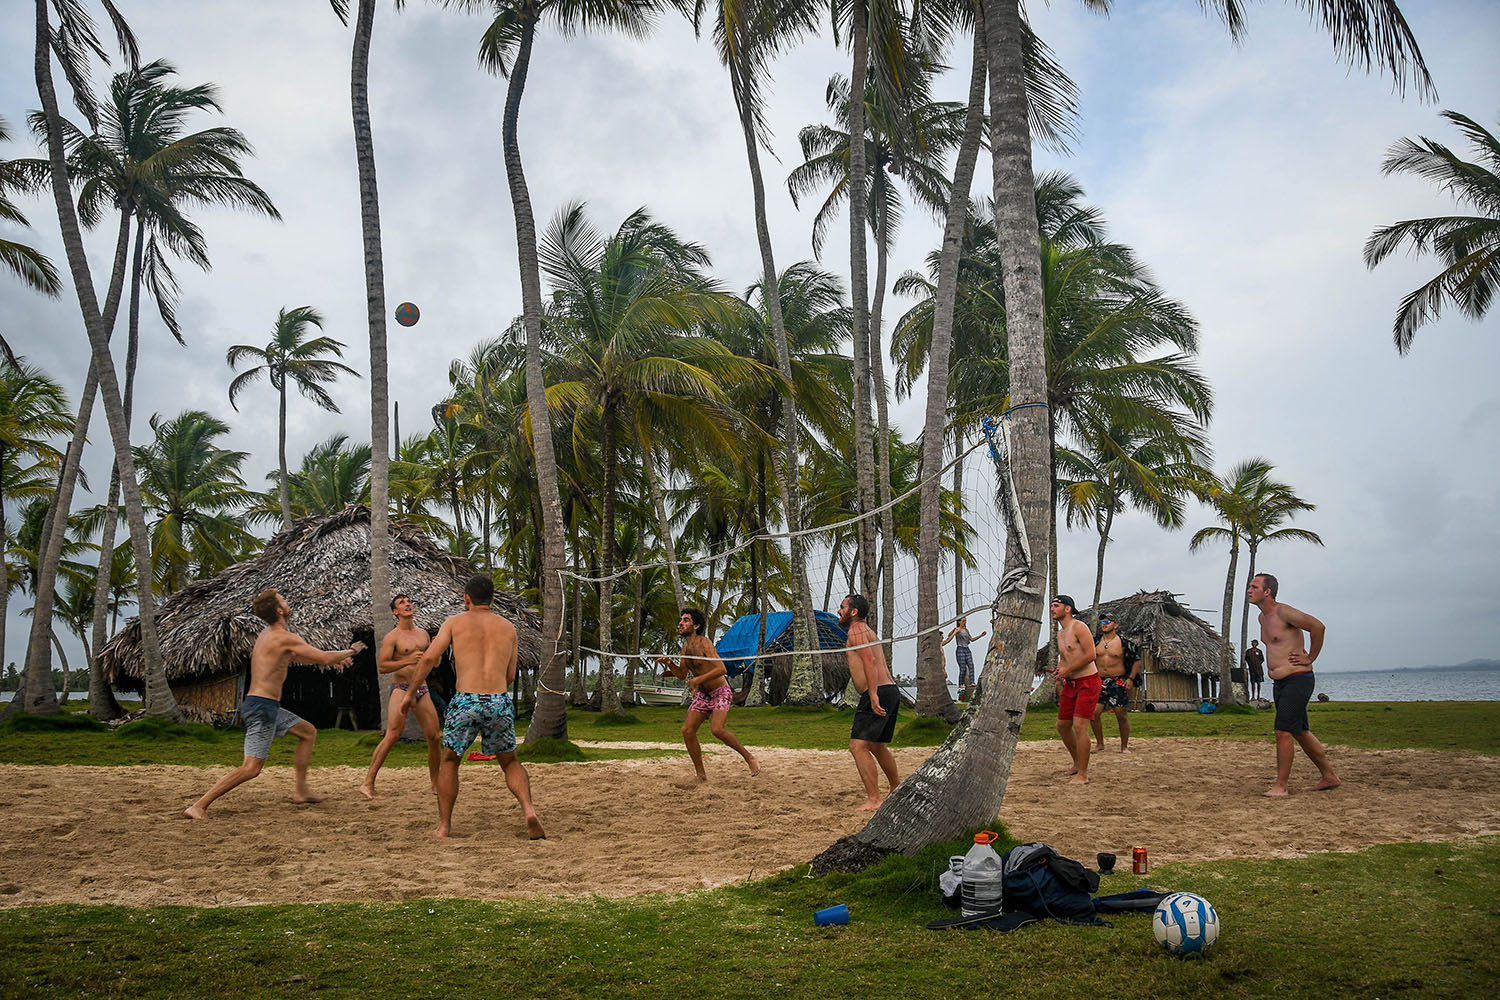 San Blas Islands Panama to Colombia Sand Volleyball